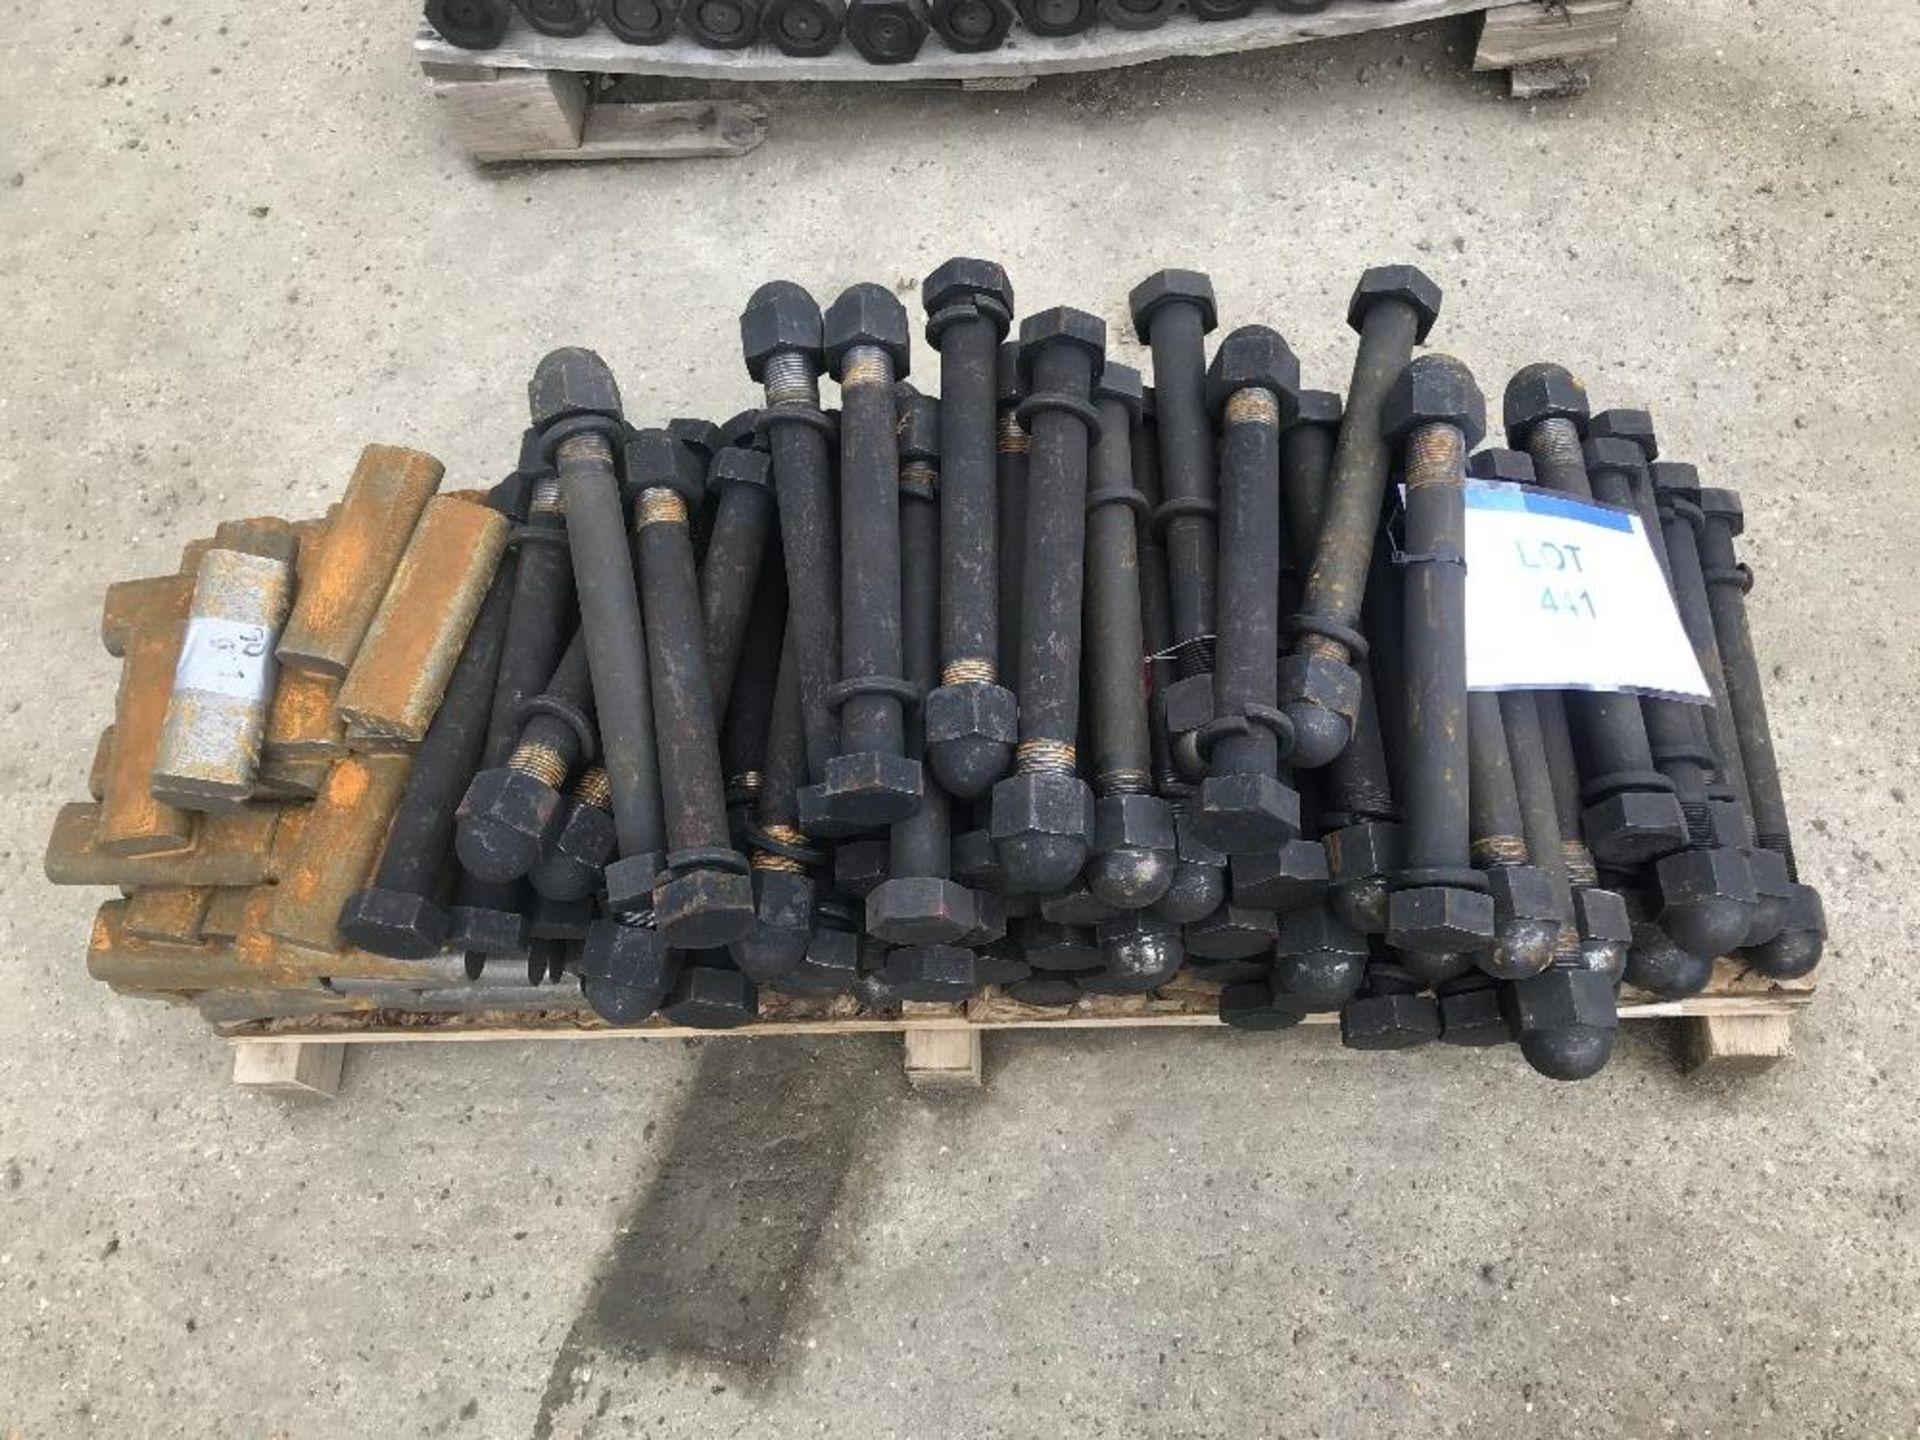 Pallet containing locking pins and heavy duty bolts